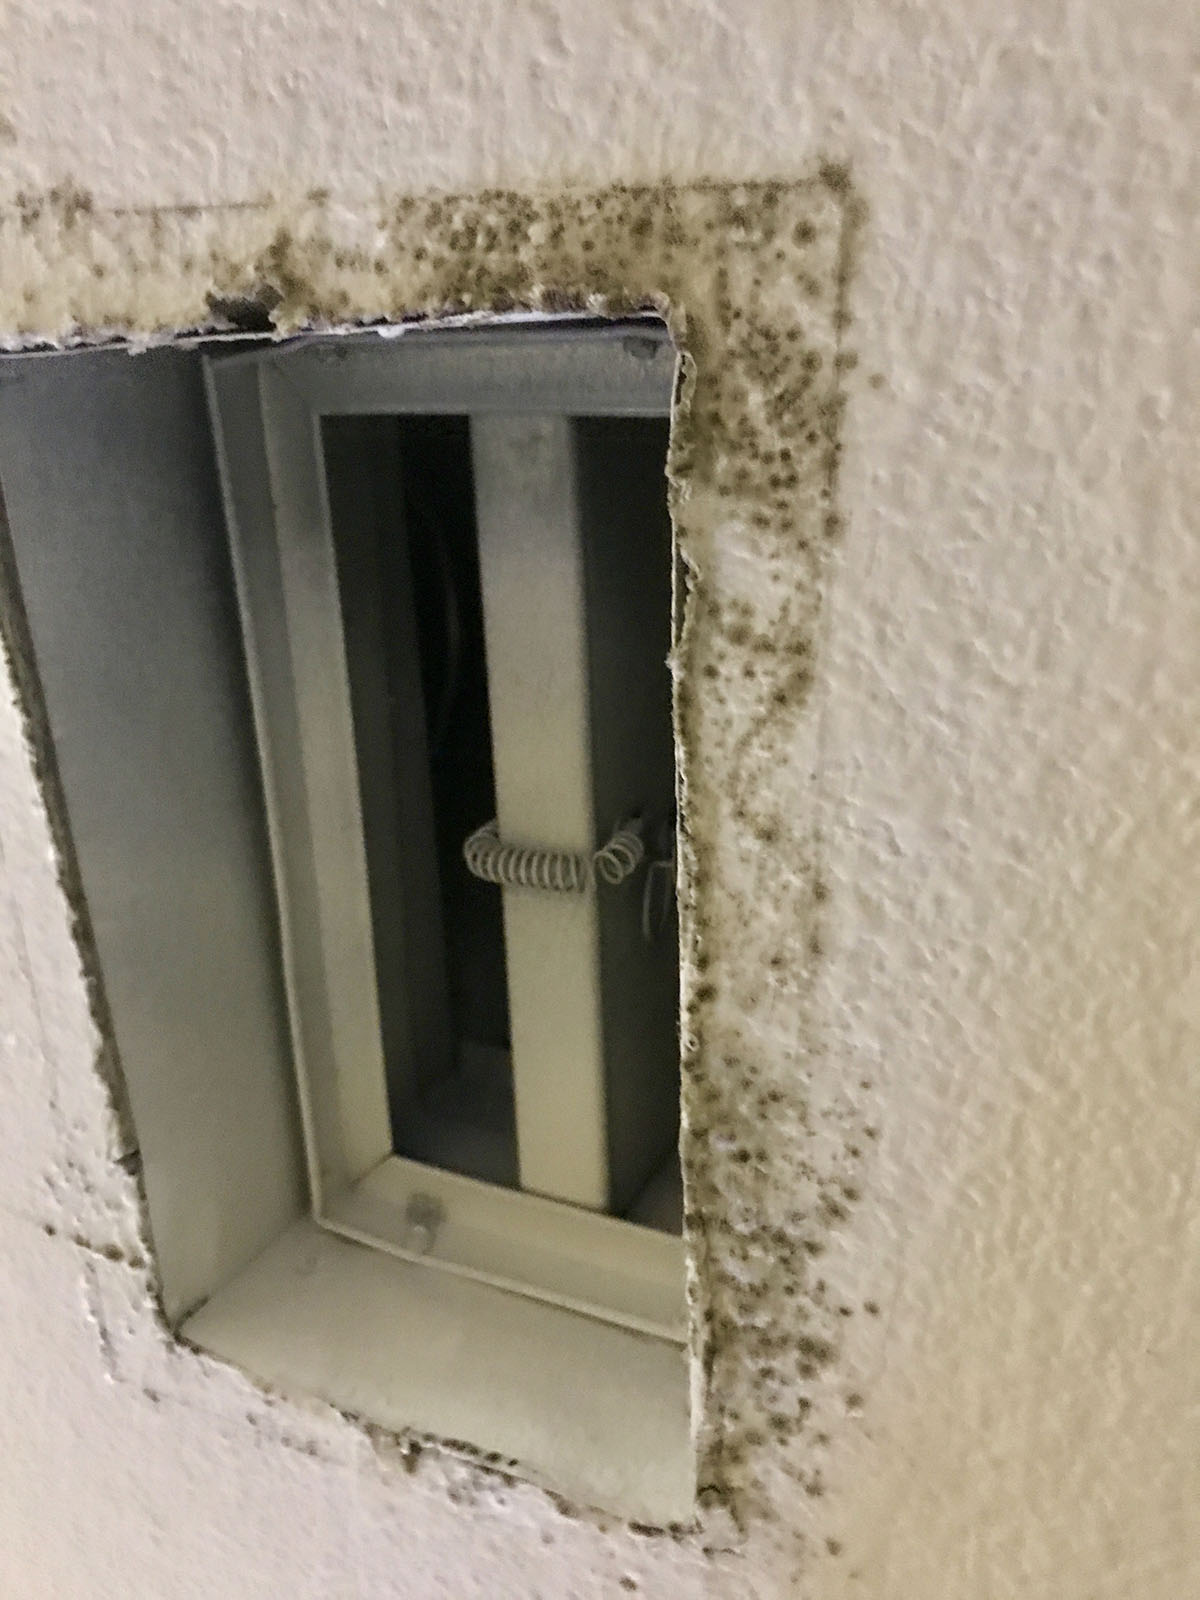 mold around a ceiling air vent